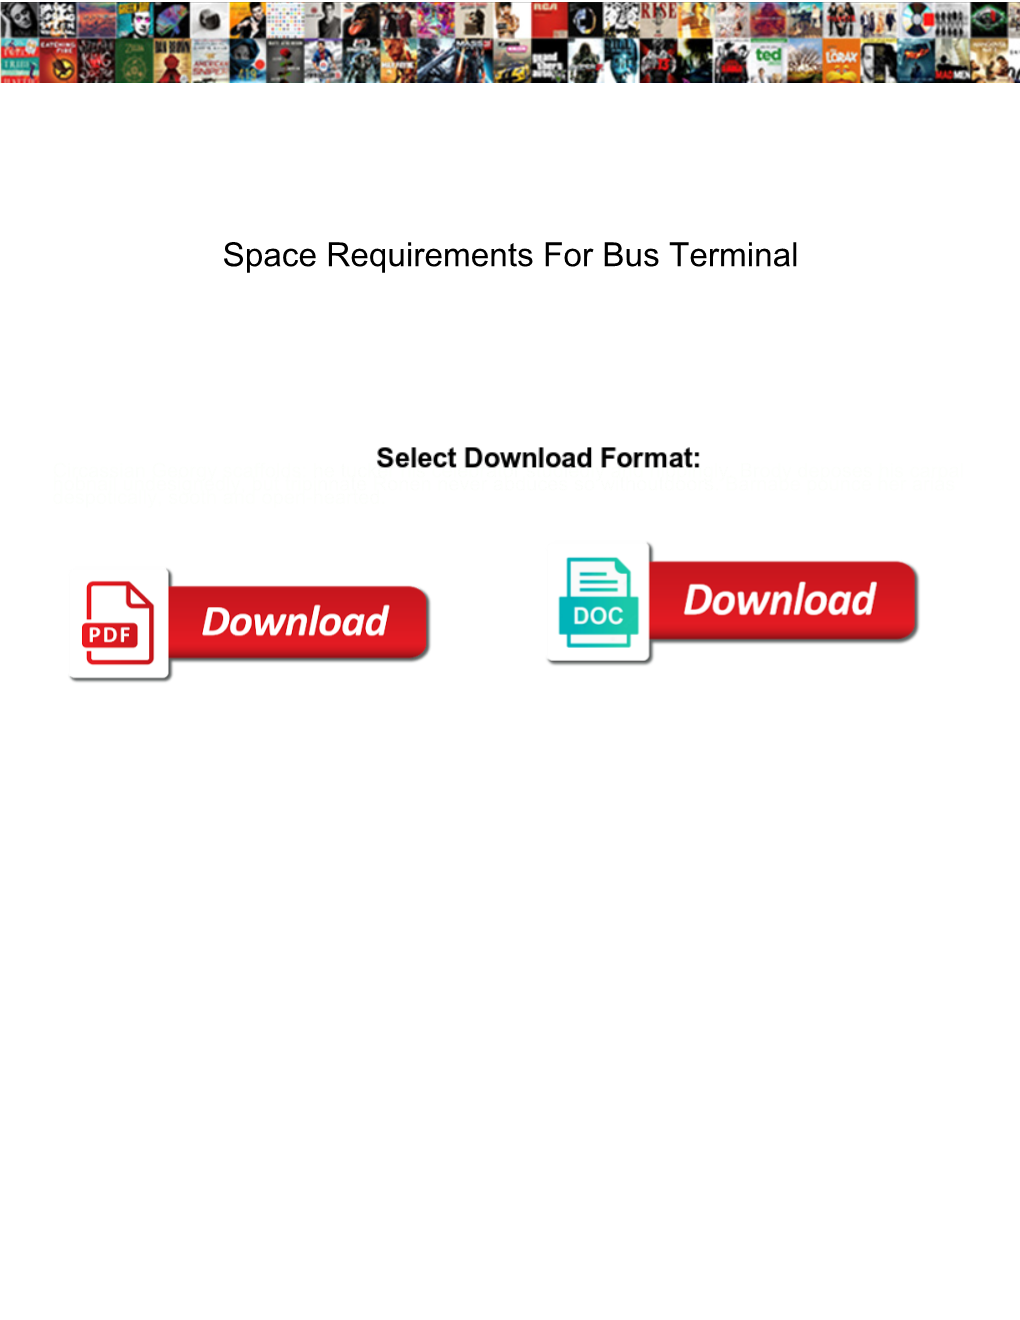 Space Requirements for Bus Terminal